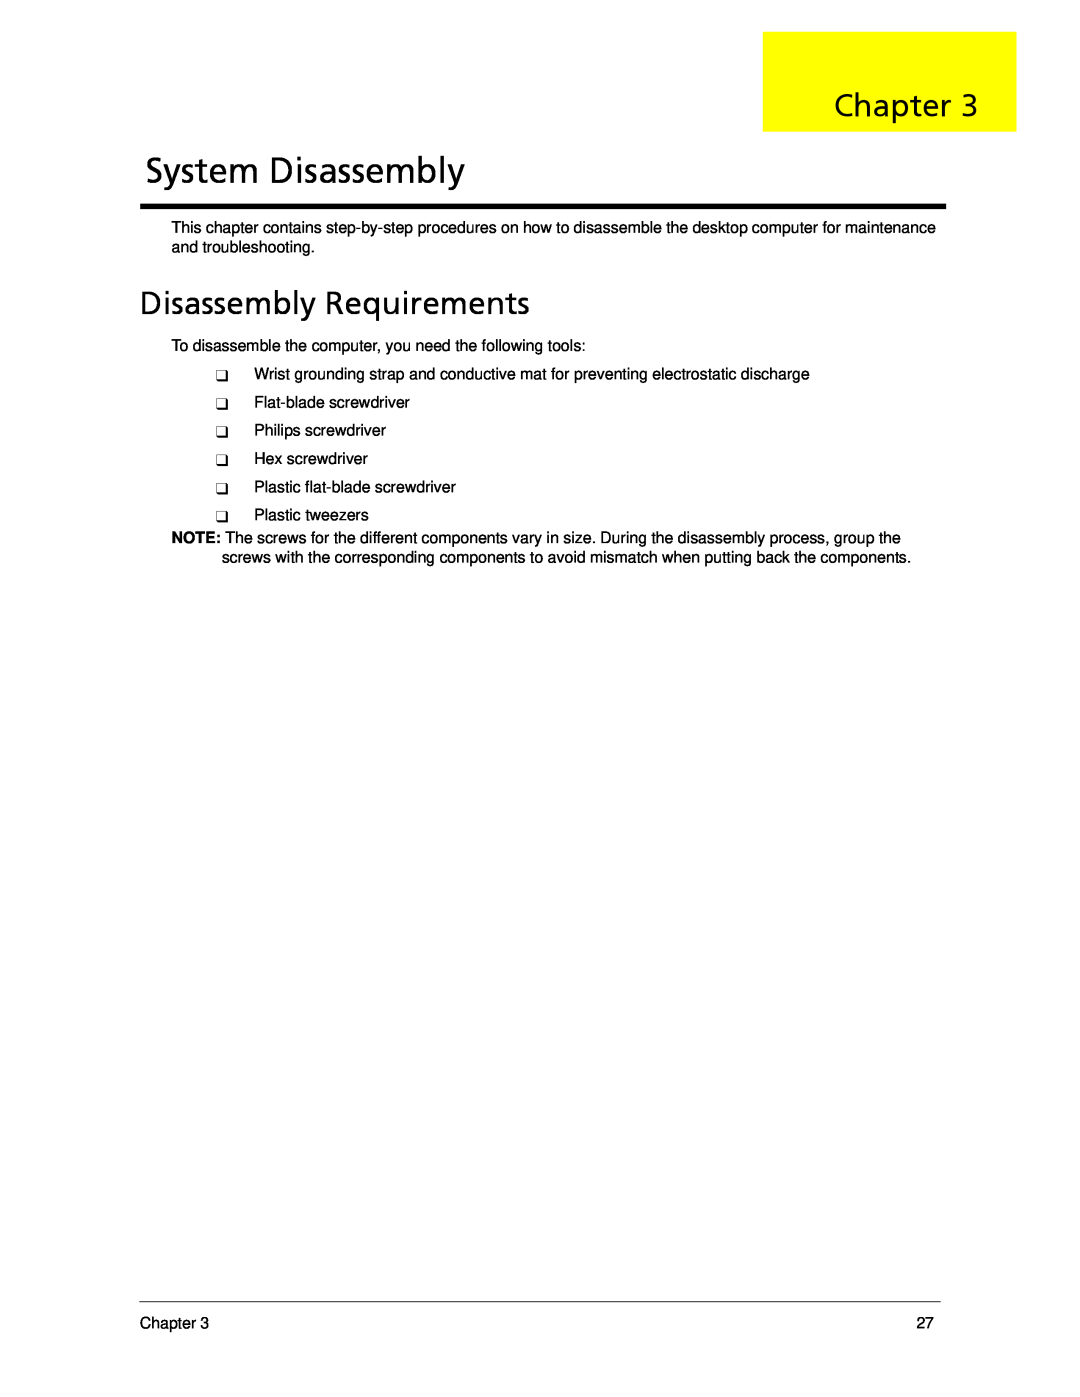 Acer X5300, X3300 manual System Disassembly, Disassembly Requirements, Chapter 